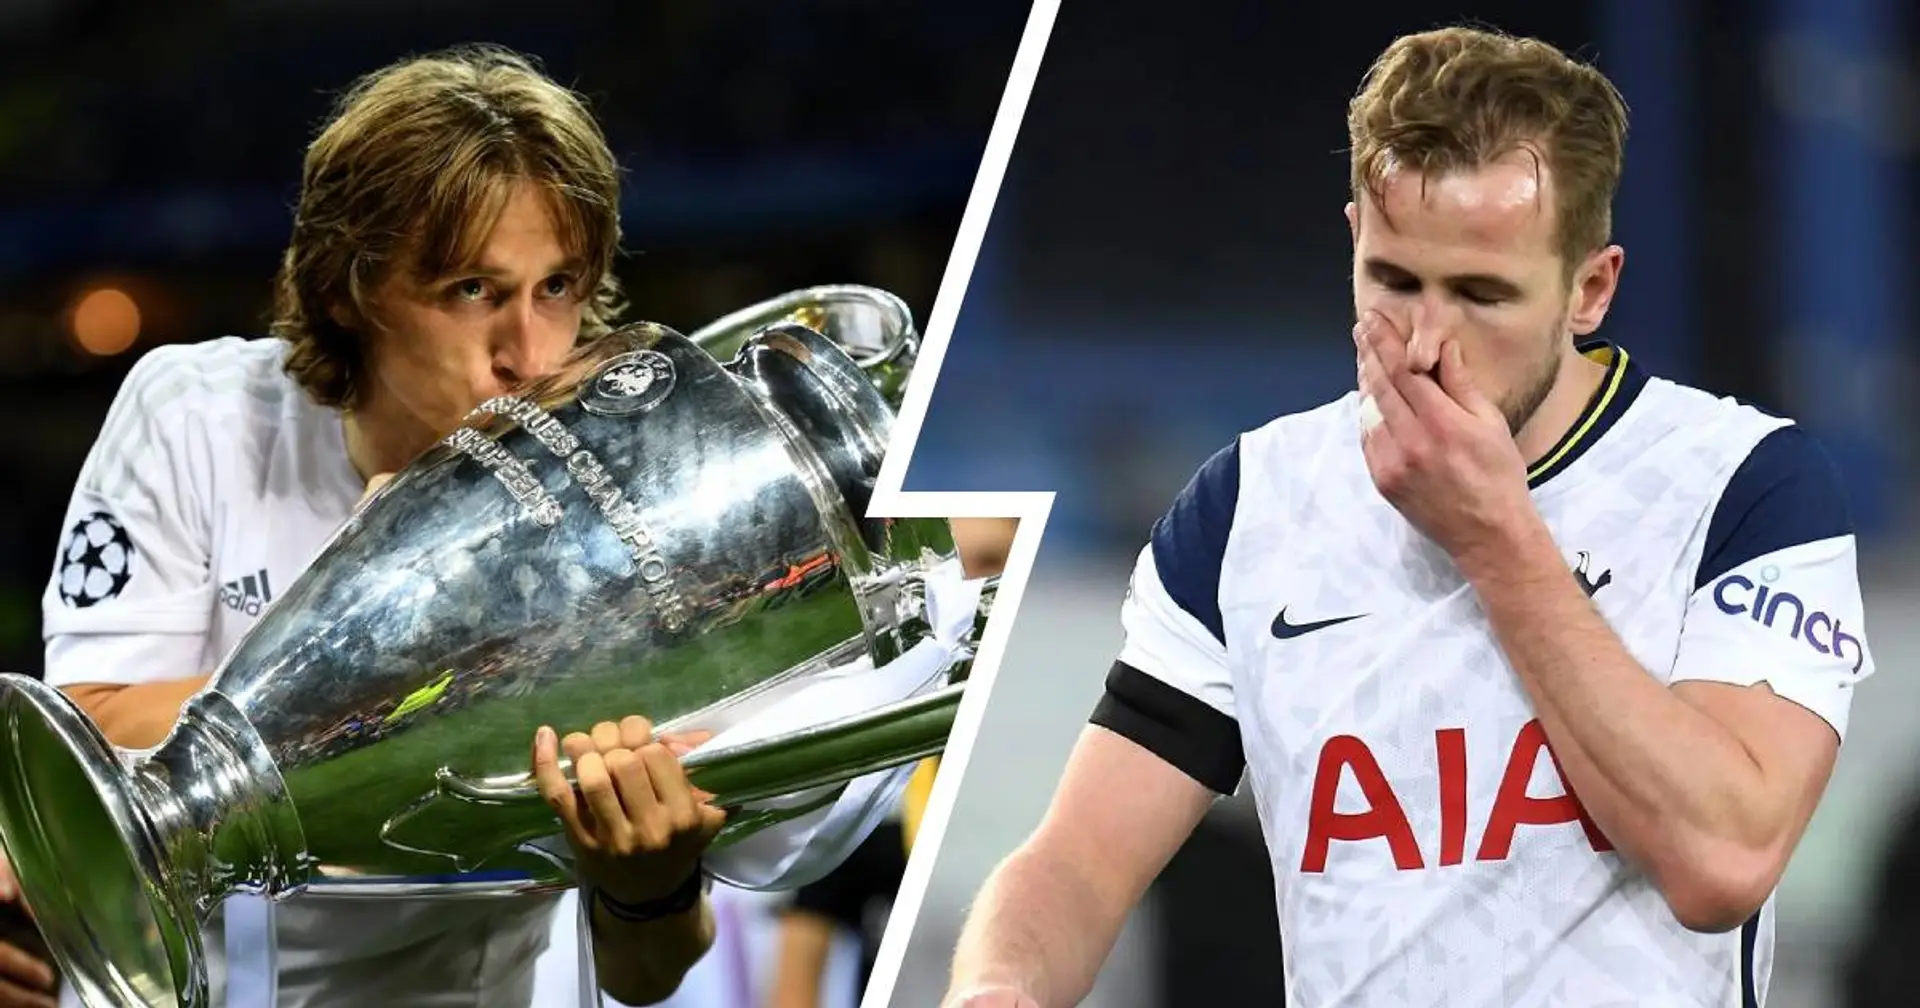 When was the last time Tottenham won a trophy? Have they won the Premier  League? Spurs out of all competitions as silverware hopes evaporate again